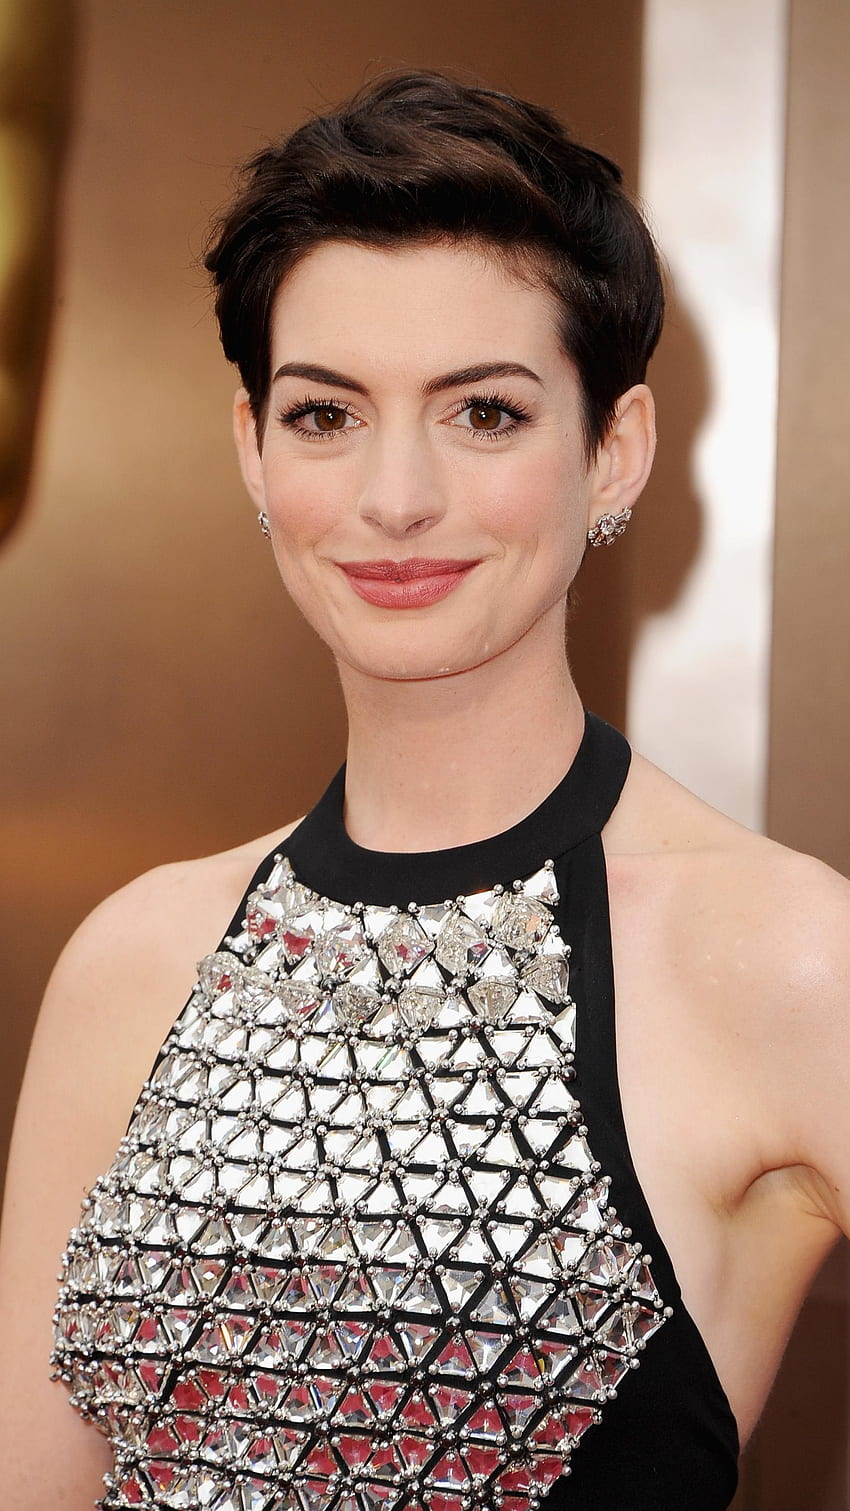 Mobile wallpaper: Anne Hathaway, Brunette, Celebrity, Brown Eyes, Short Hair,  Black Dress, Actress, 1375273 download the picture for free.